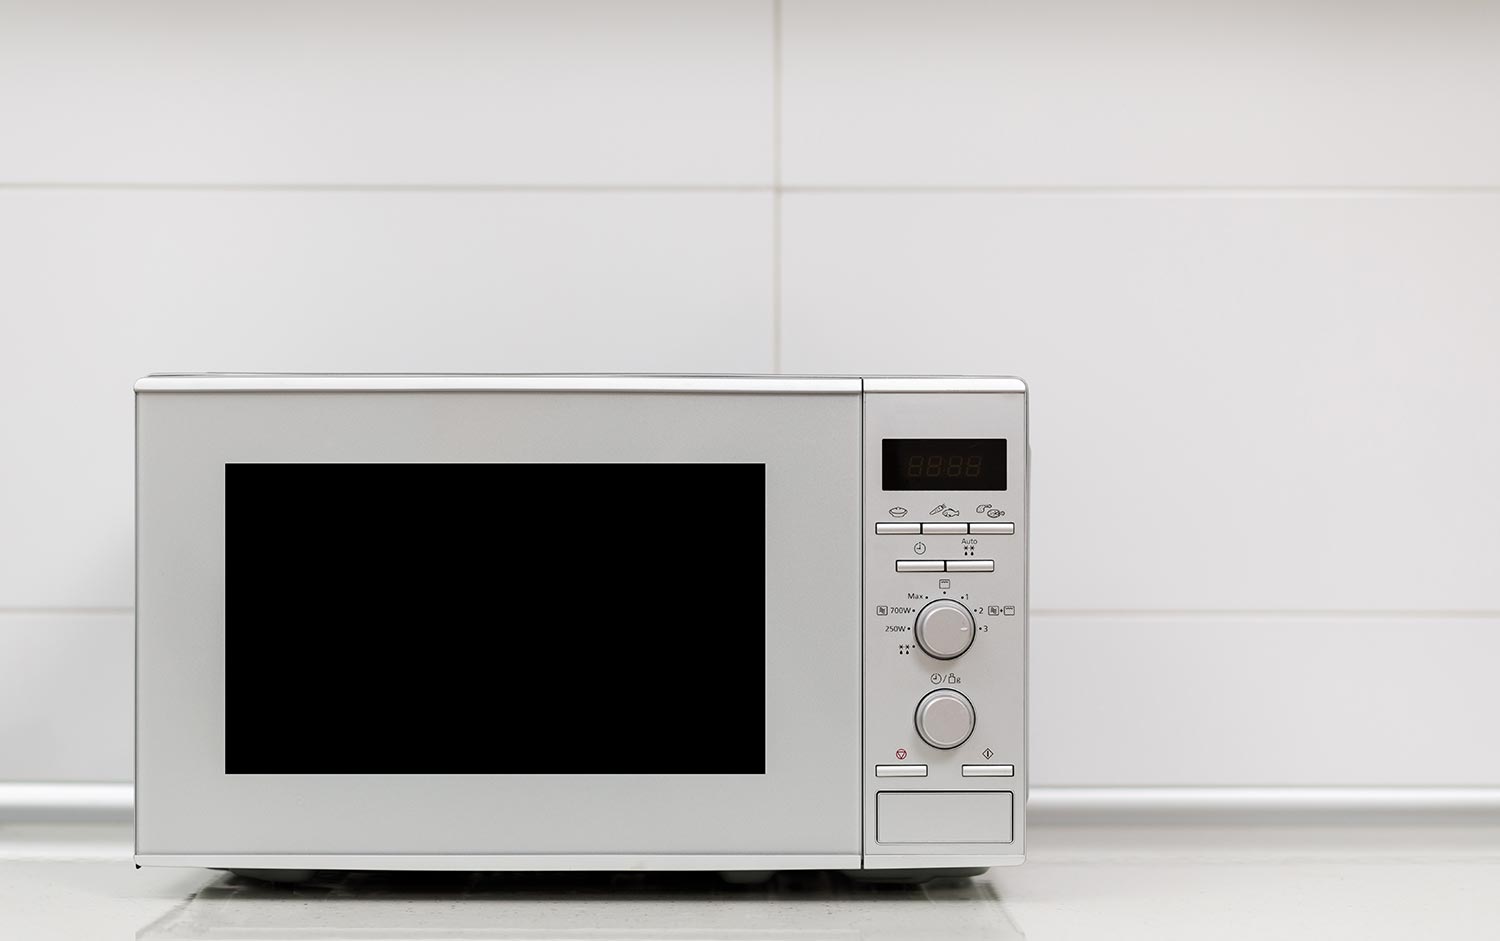 Kitchen interior with microwave oven